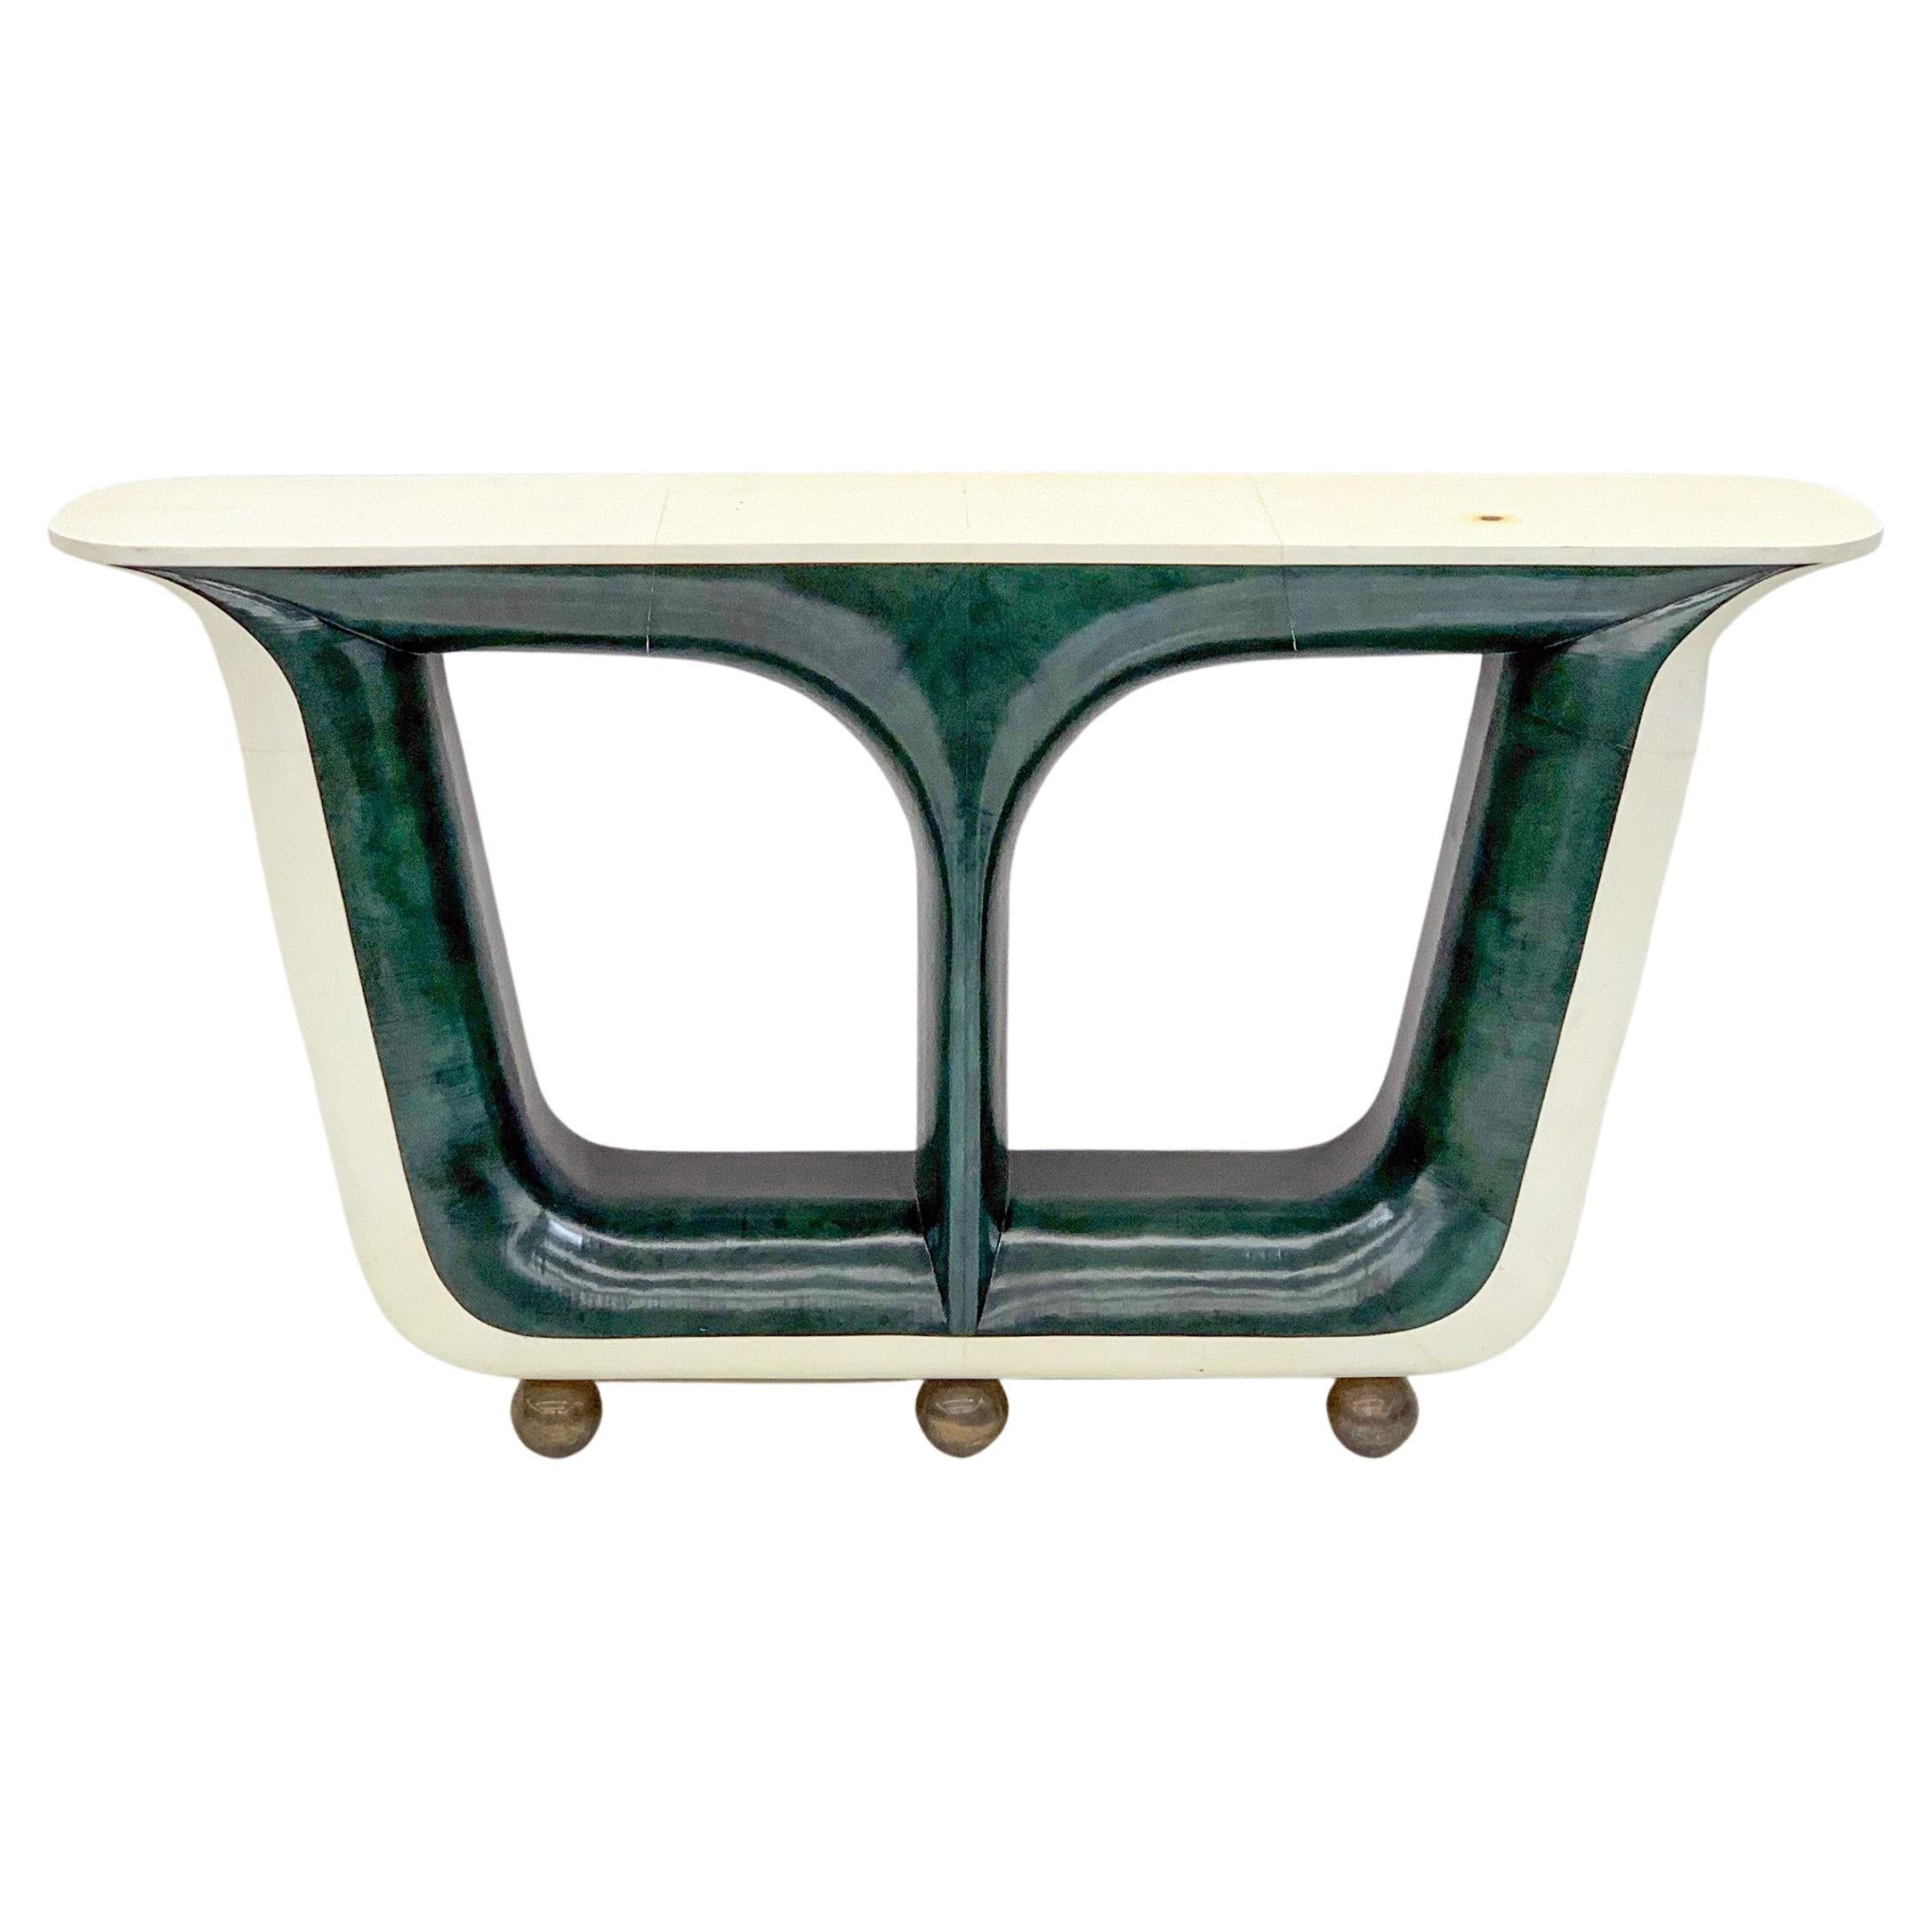 Emerald Green and Cream Parchment Goatskin Console Table with Bronze Feet